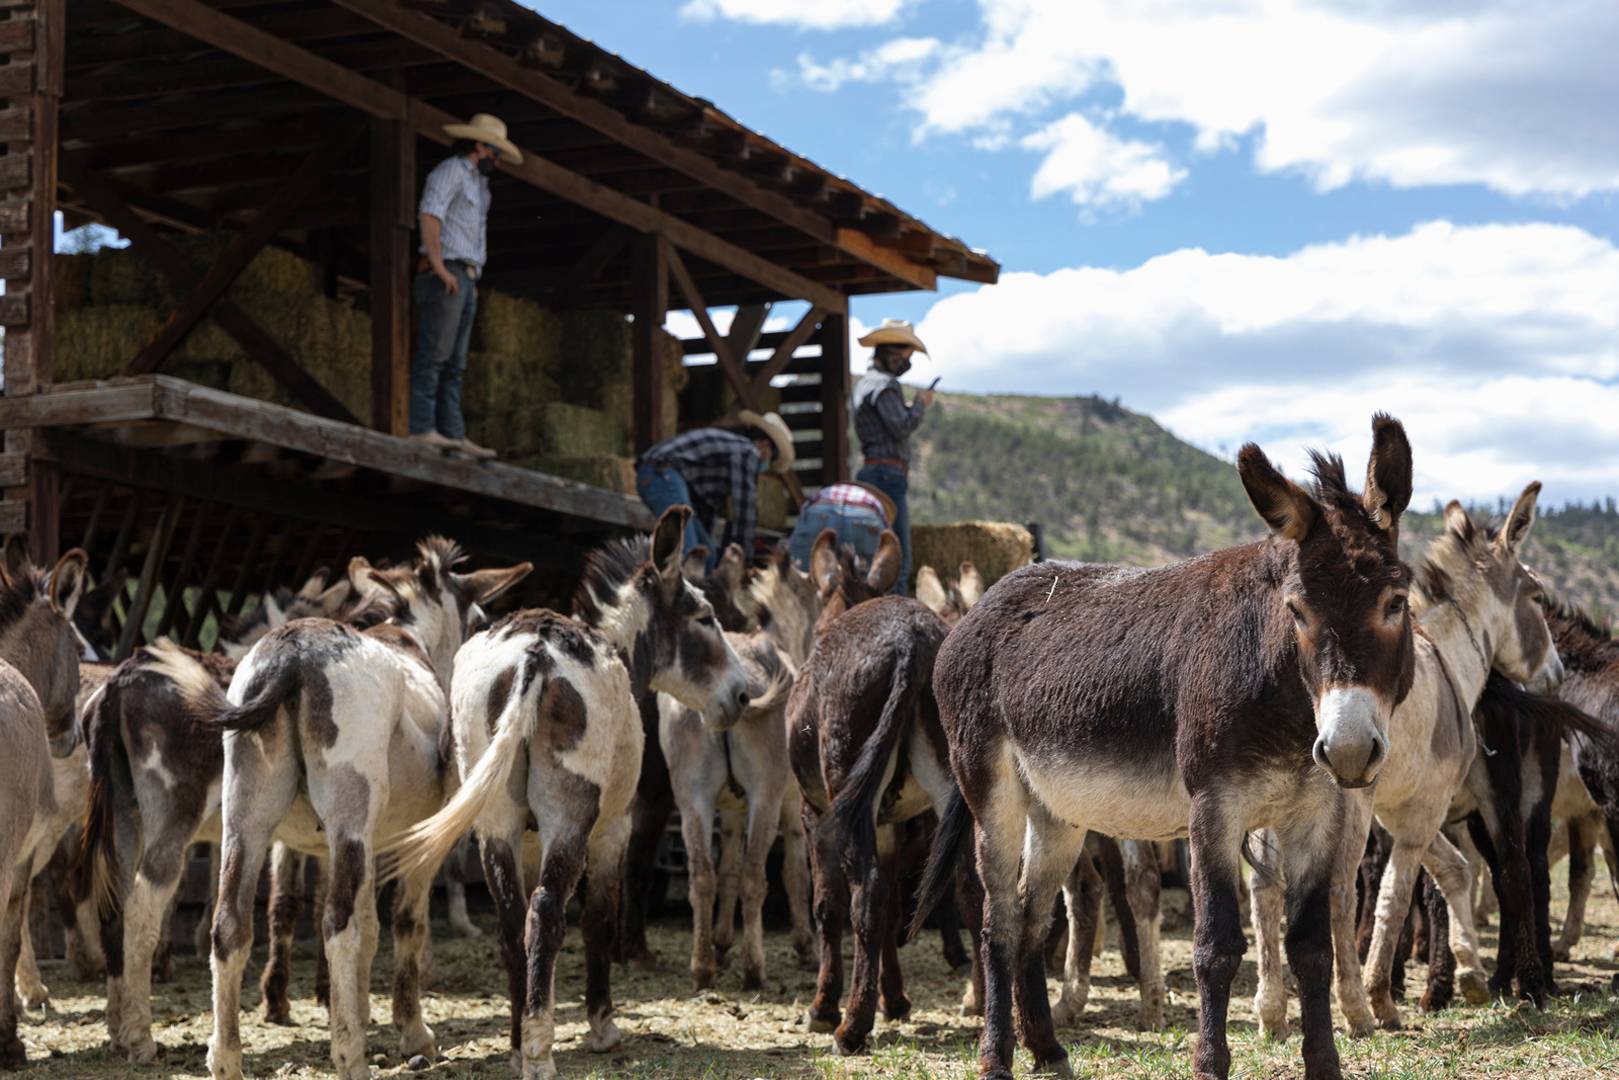 Wranglers feed burros that are located at Ponil Backcountry Staff Camp at Philmont Scout Ranch in Cimarron, N.M., on Sunday, June 5, 2022.